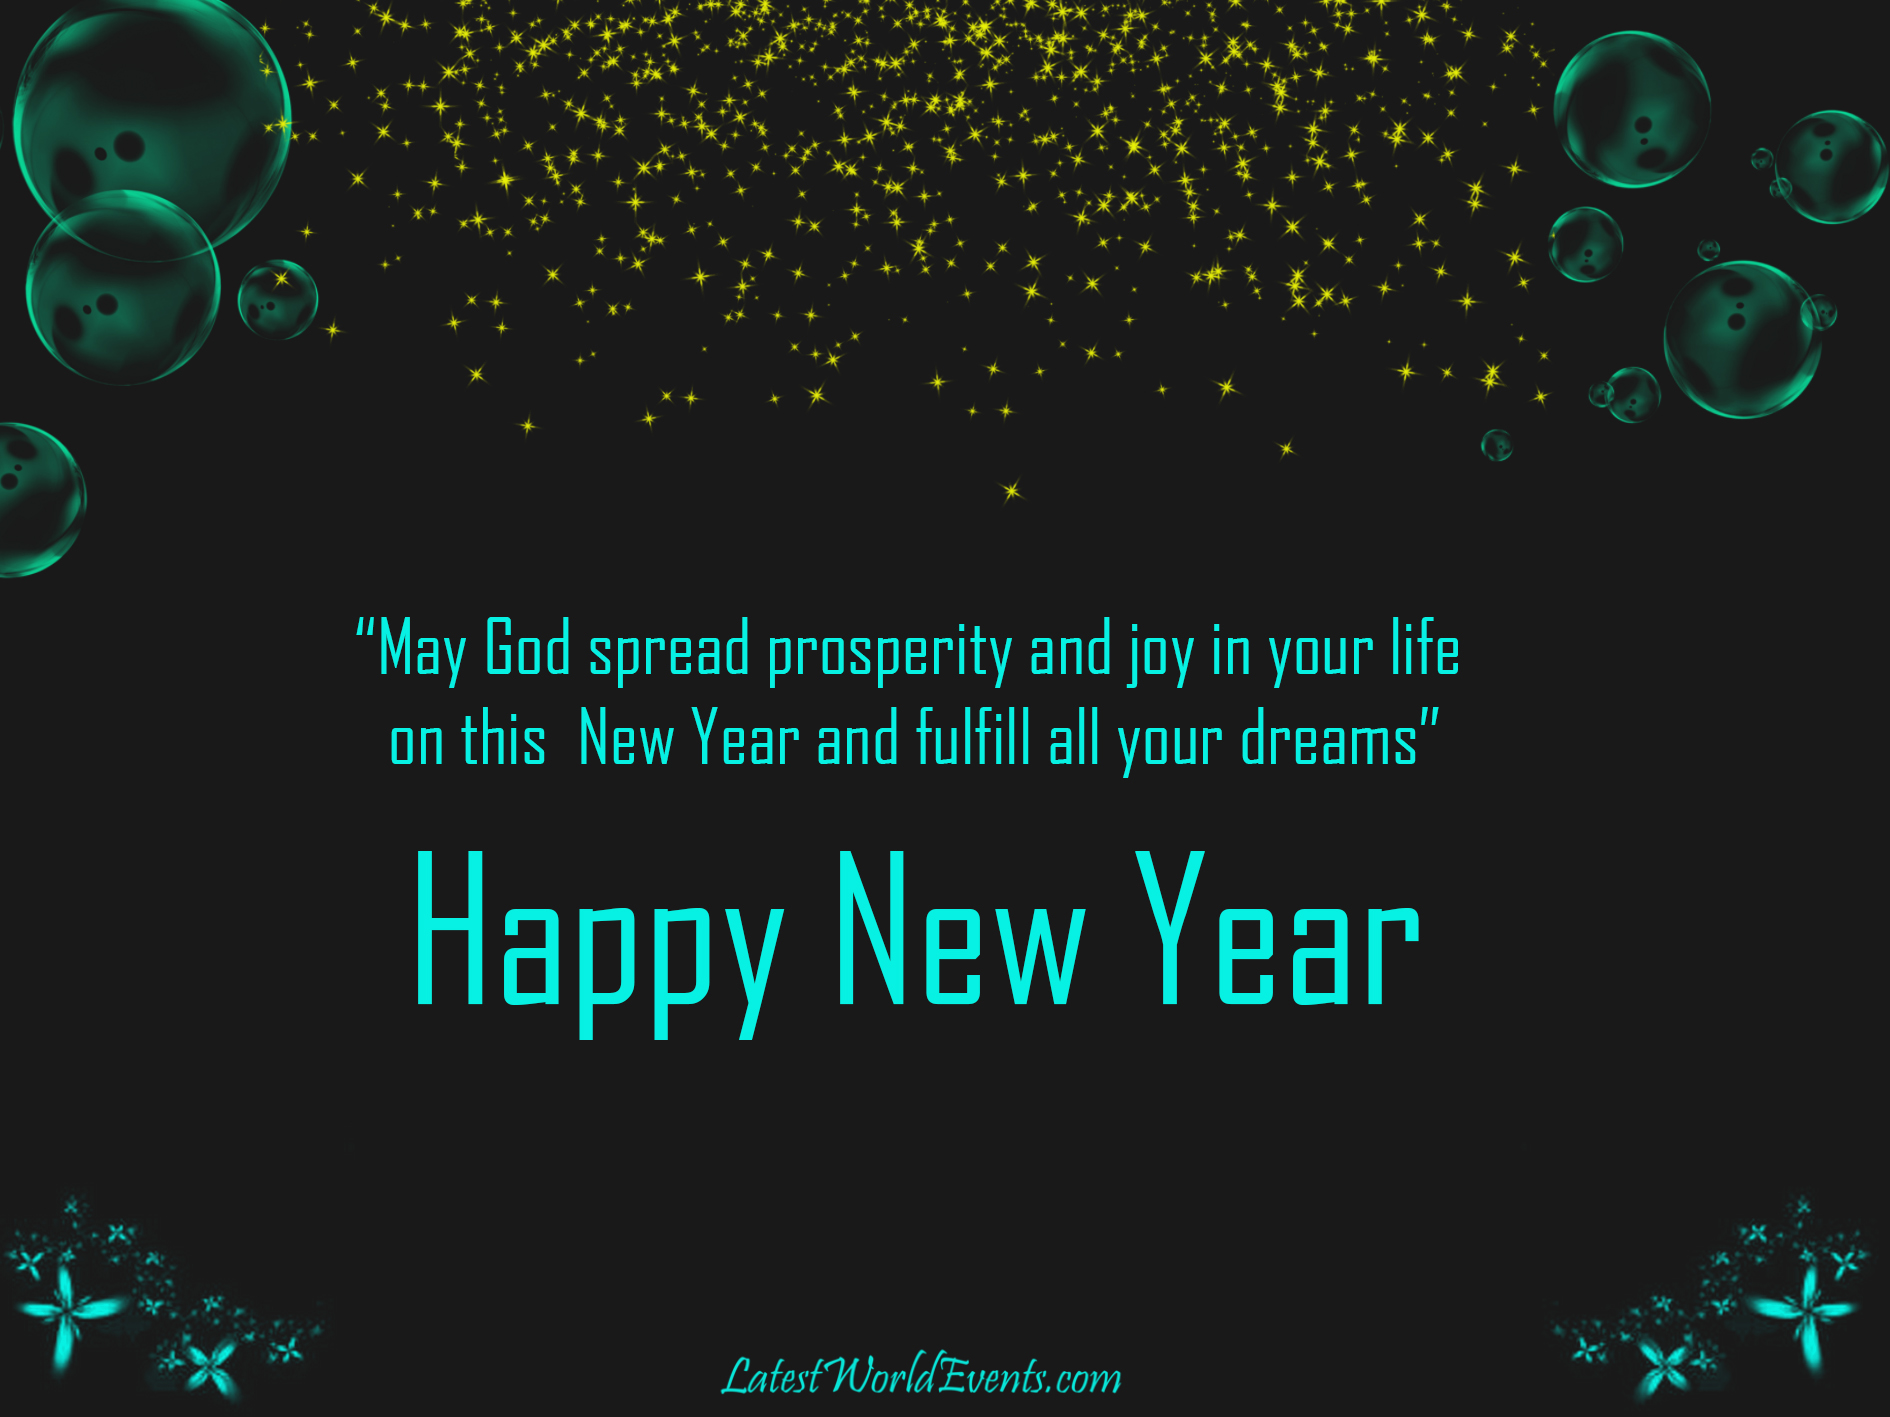 Download-happy-new-year-card-wishes-images